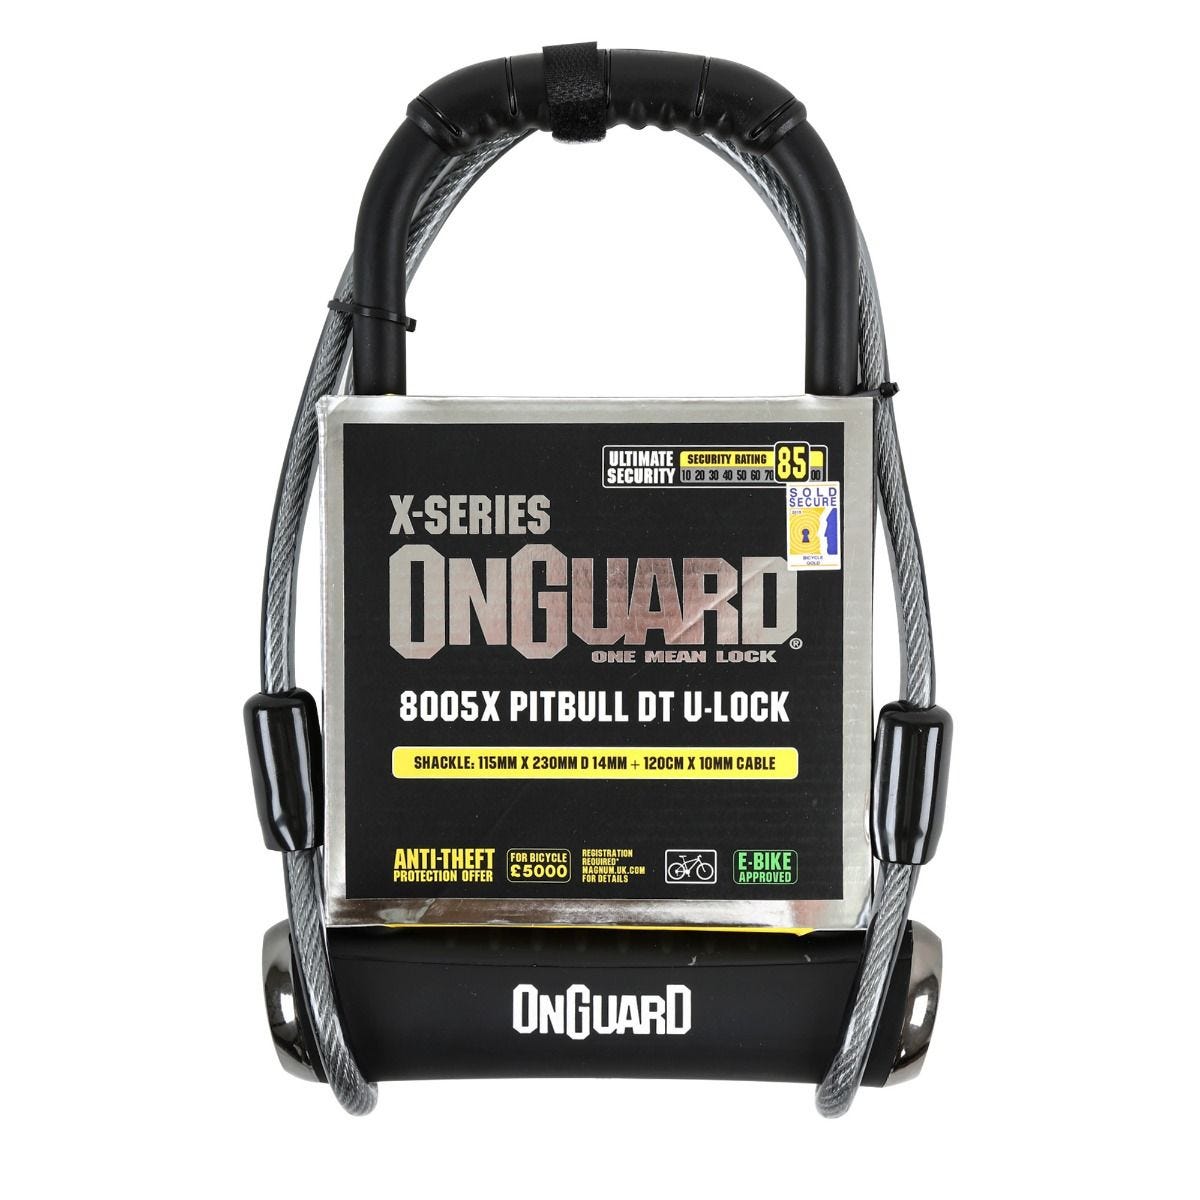 OnGuard Pitbull DT 8005 U-Lock 115 X 230 X 14mm Sold Secure Diamond shackle and cable lock